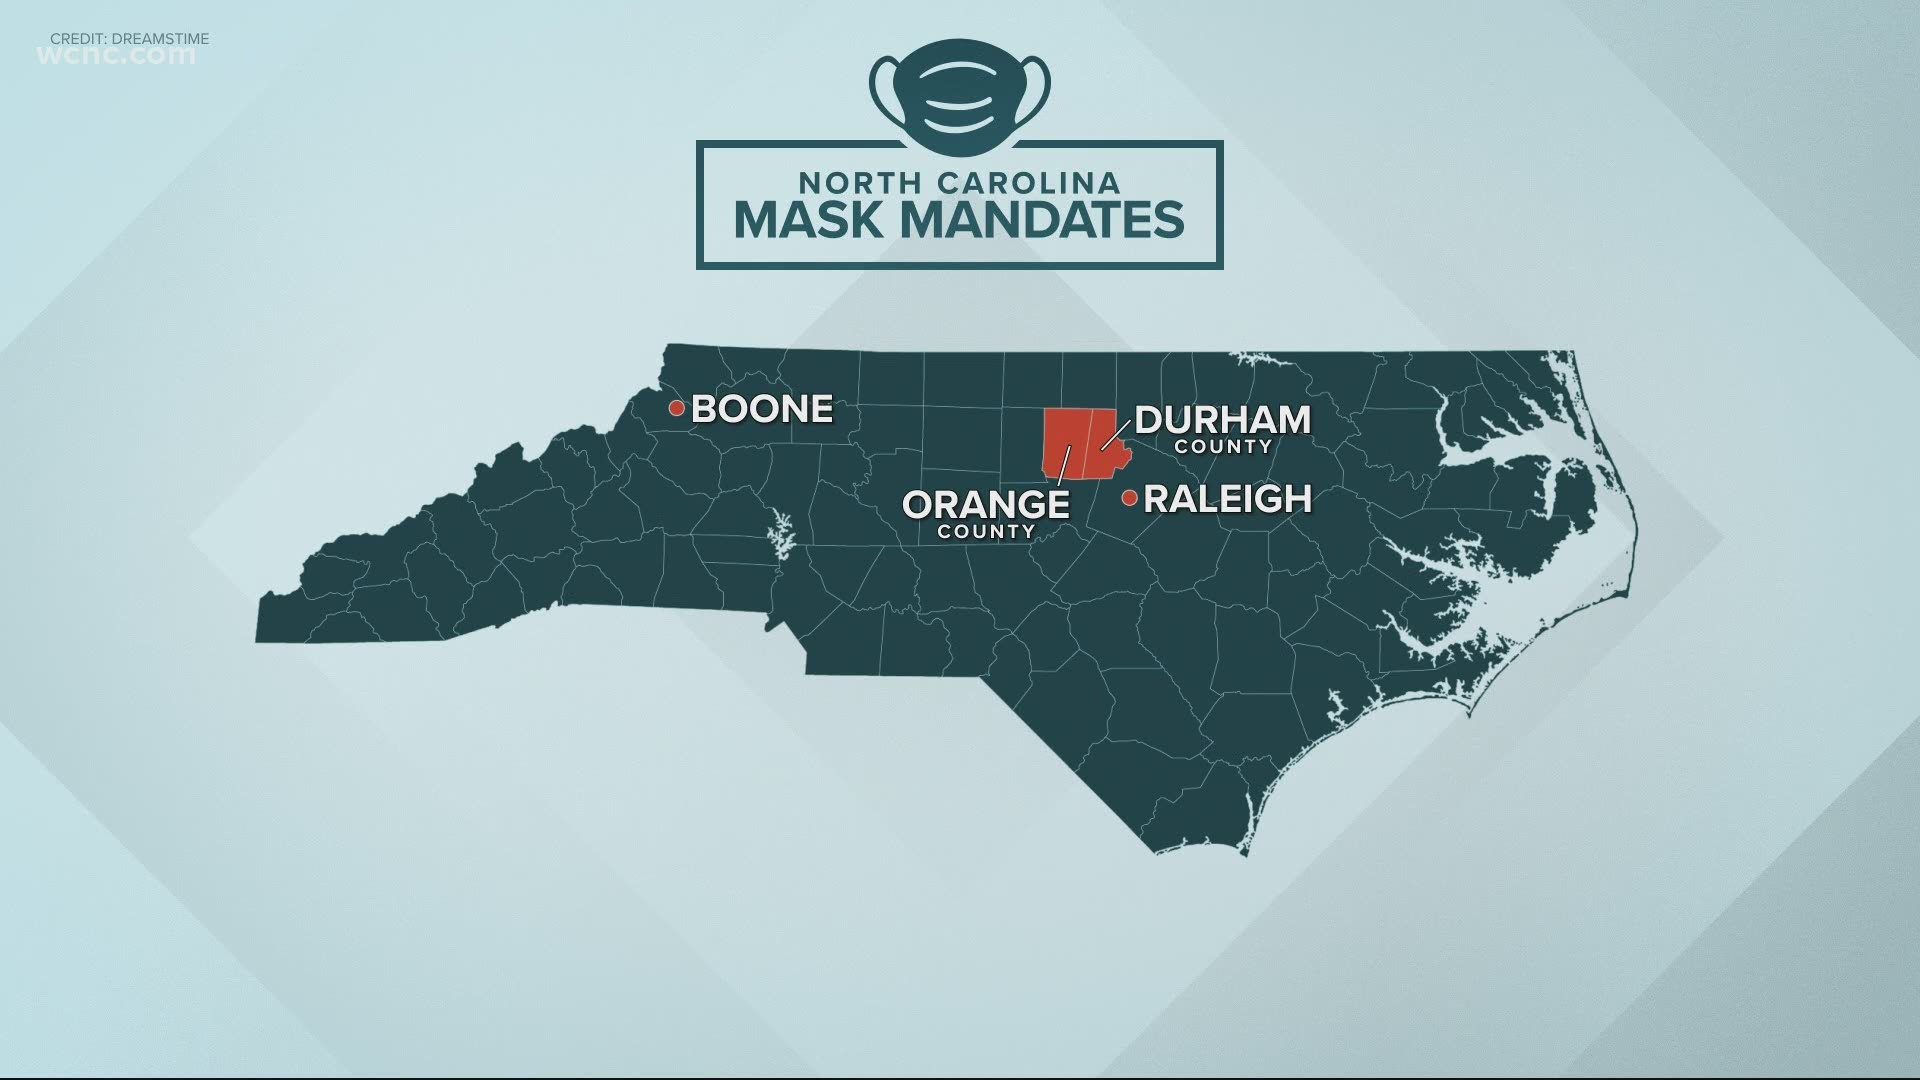 Mecklenburg county leaders are looking into the possibility of making masks mandatory